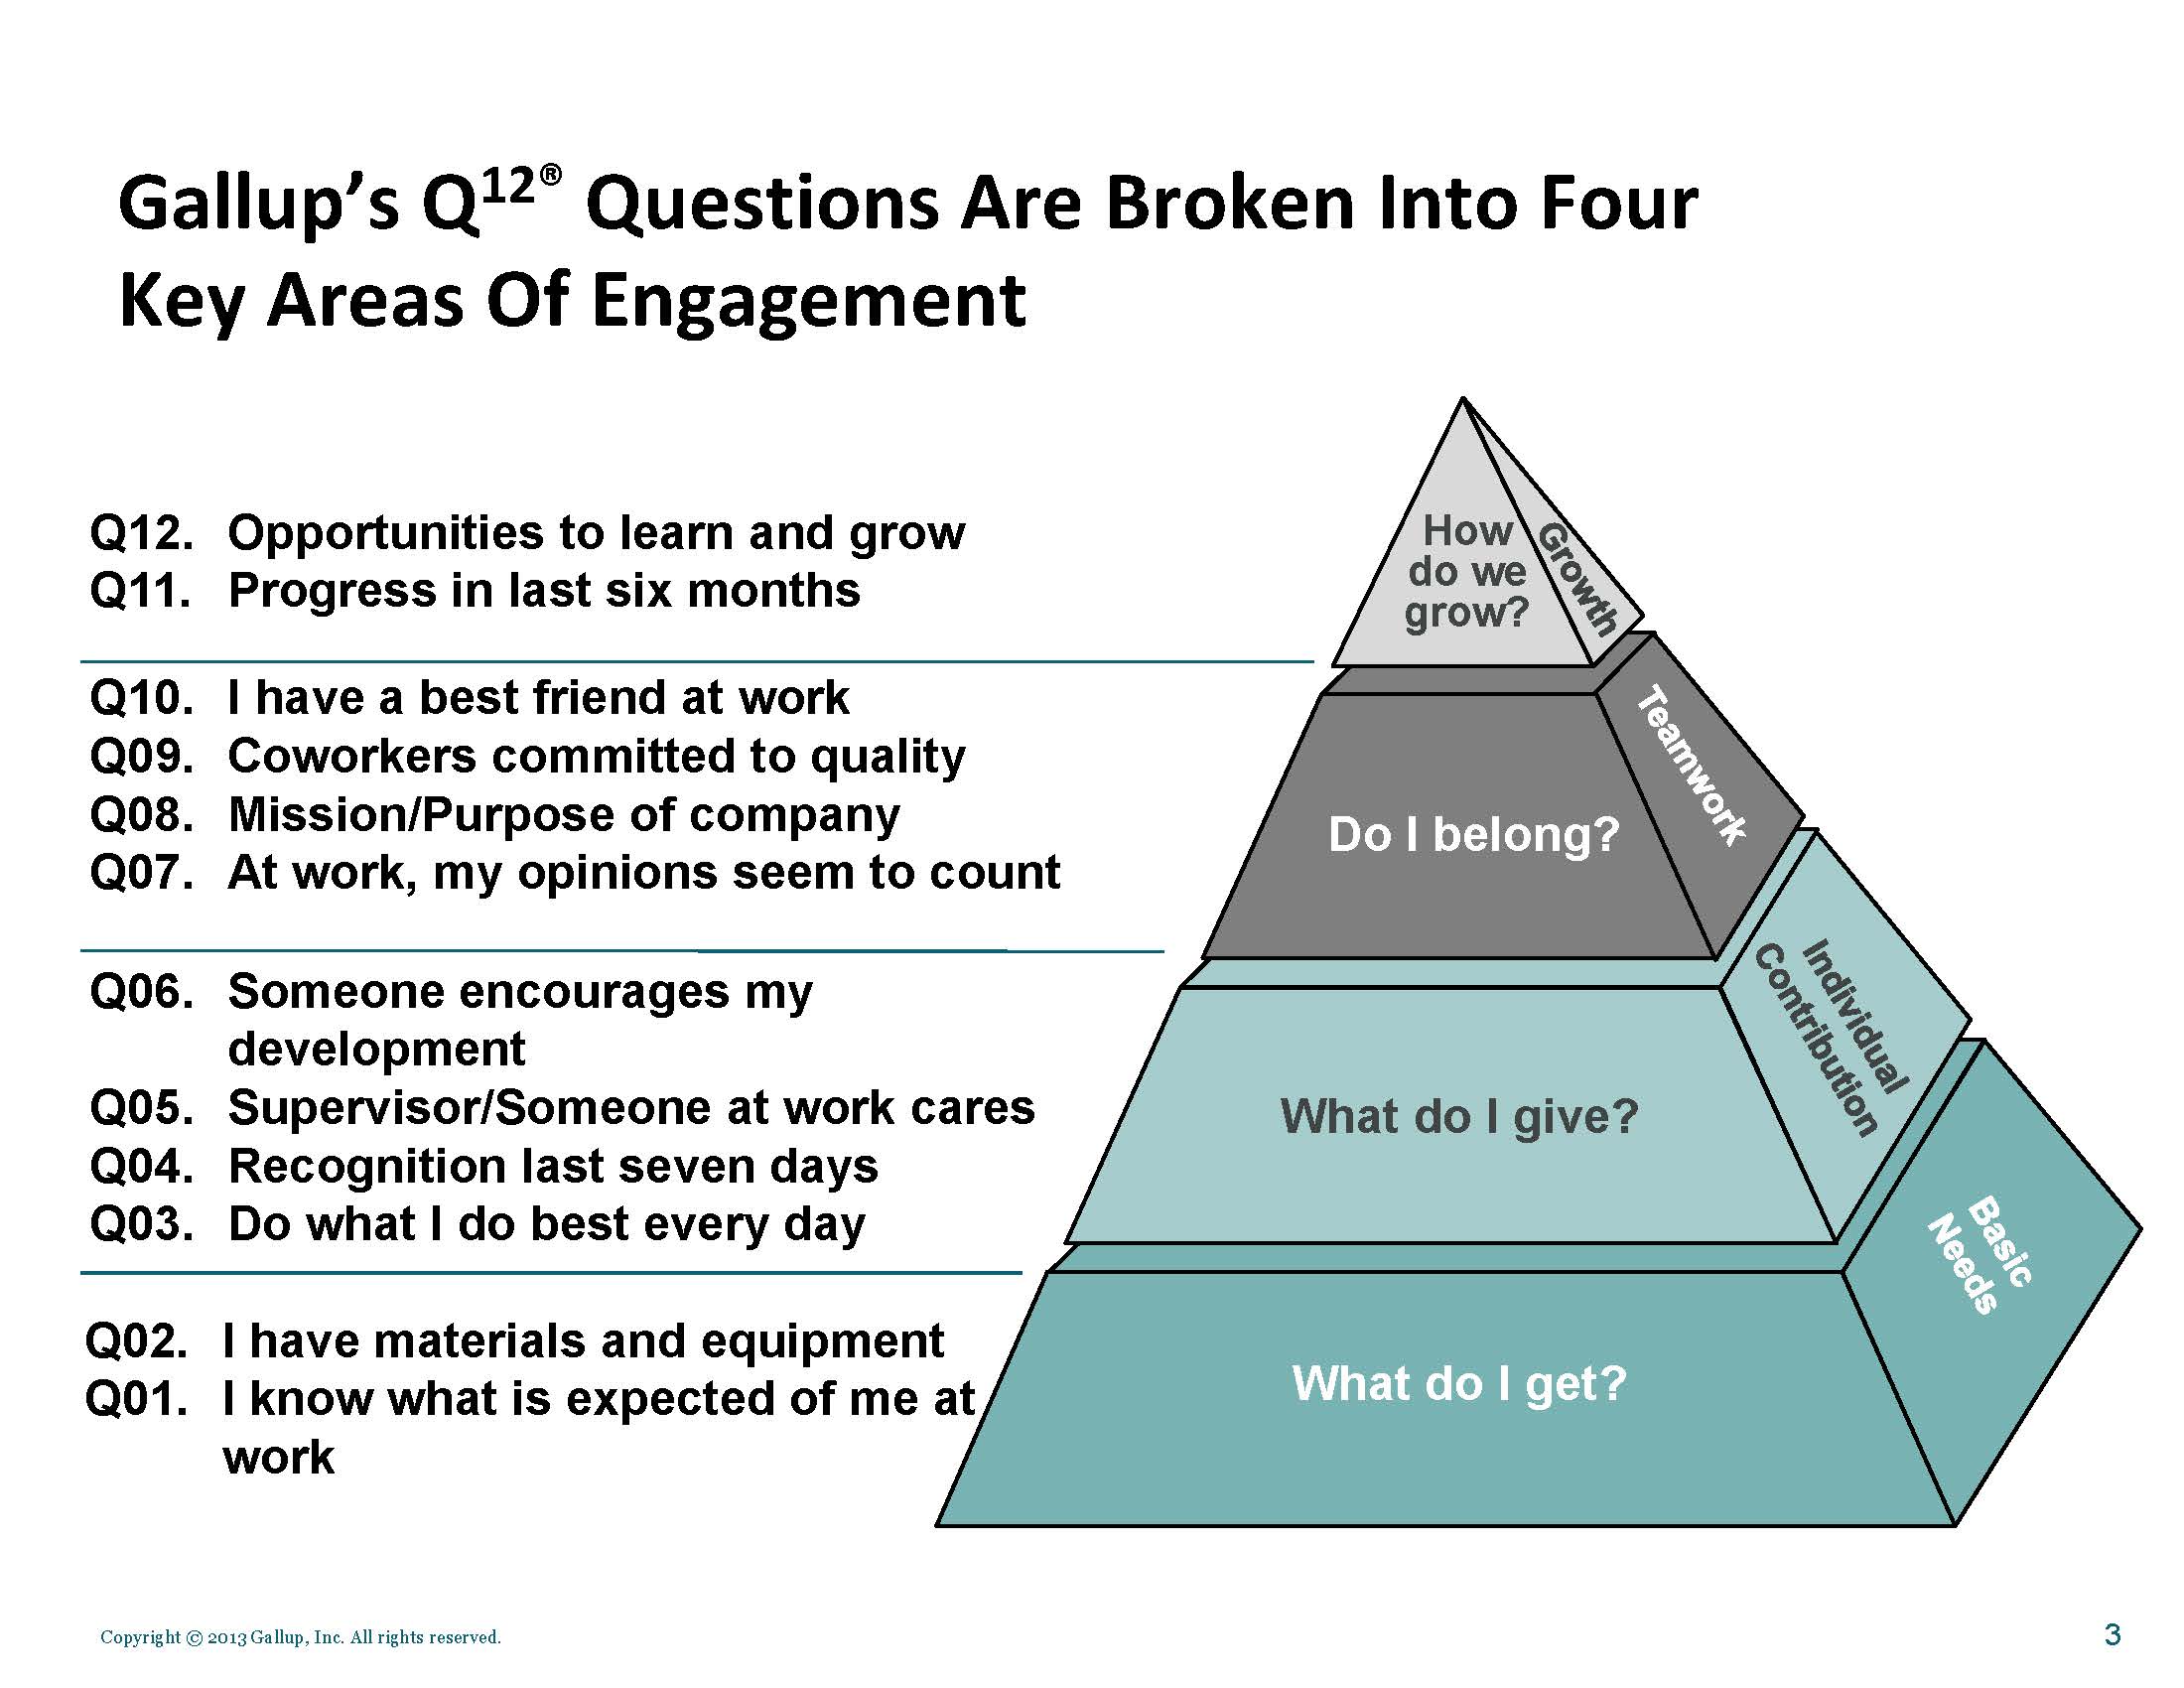 Image reminds uers of the 12 questions in the Gallup engagement survey.